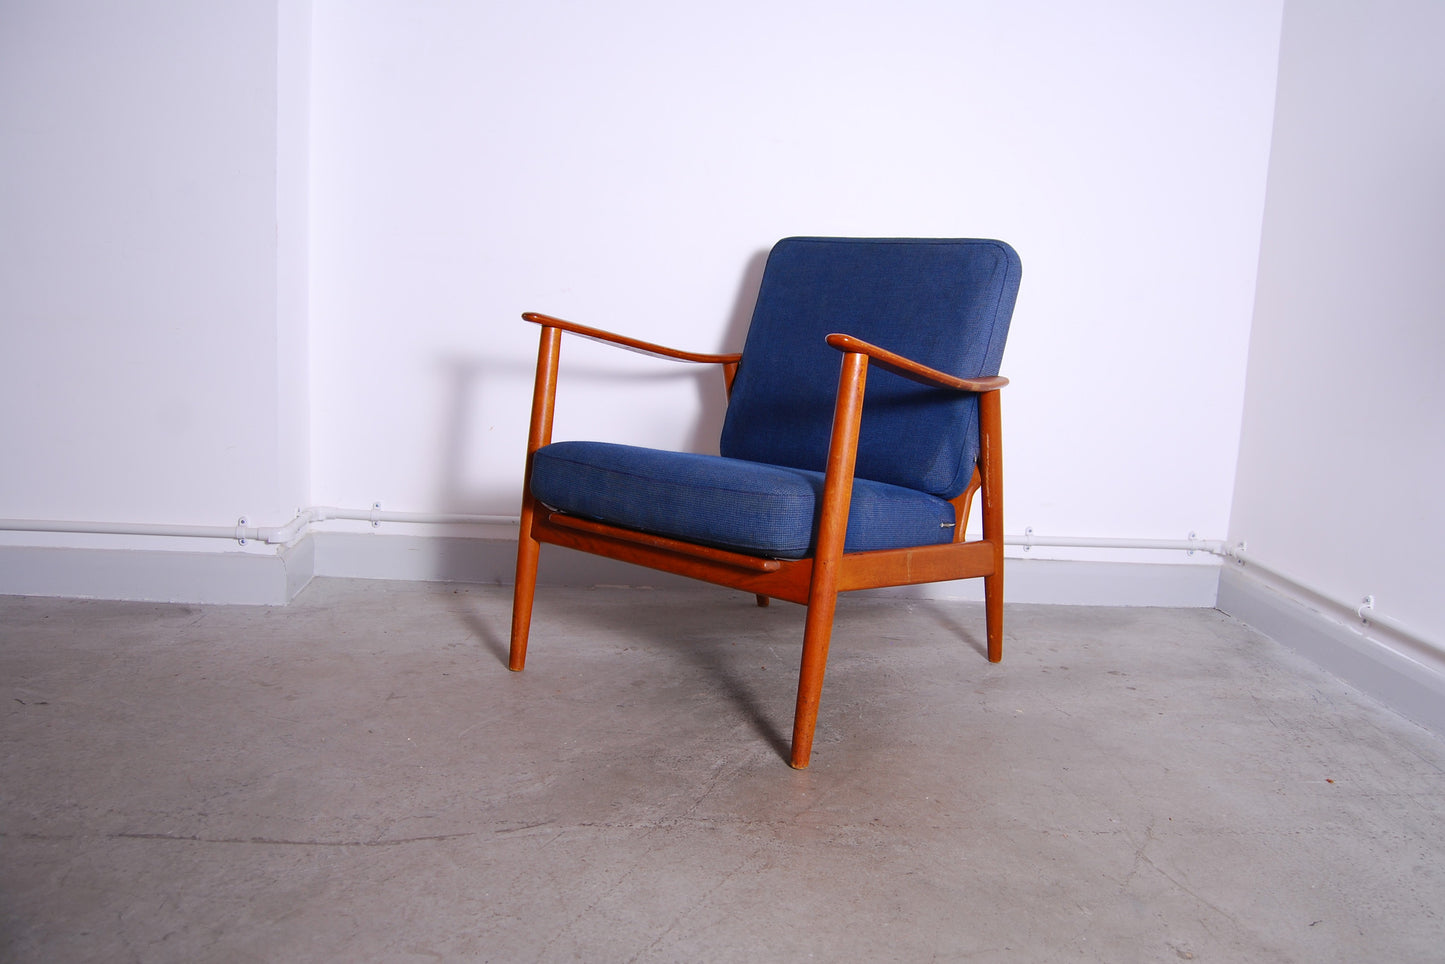 Teak lounge chair with royal blue cushions